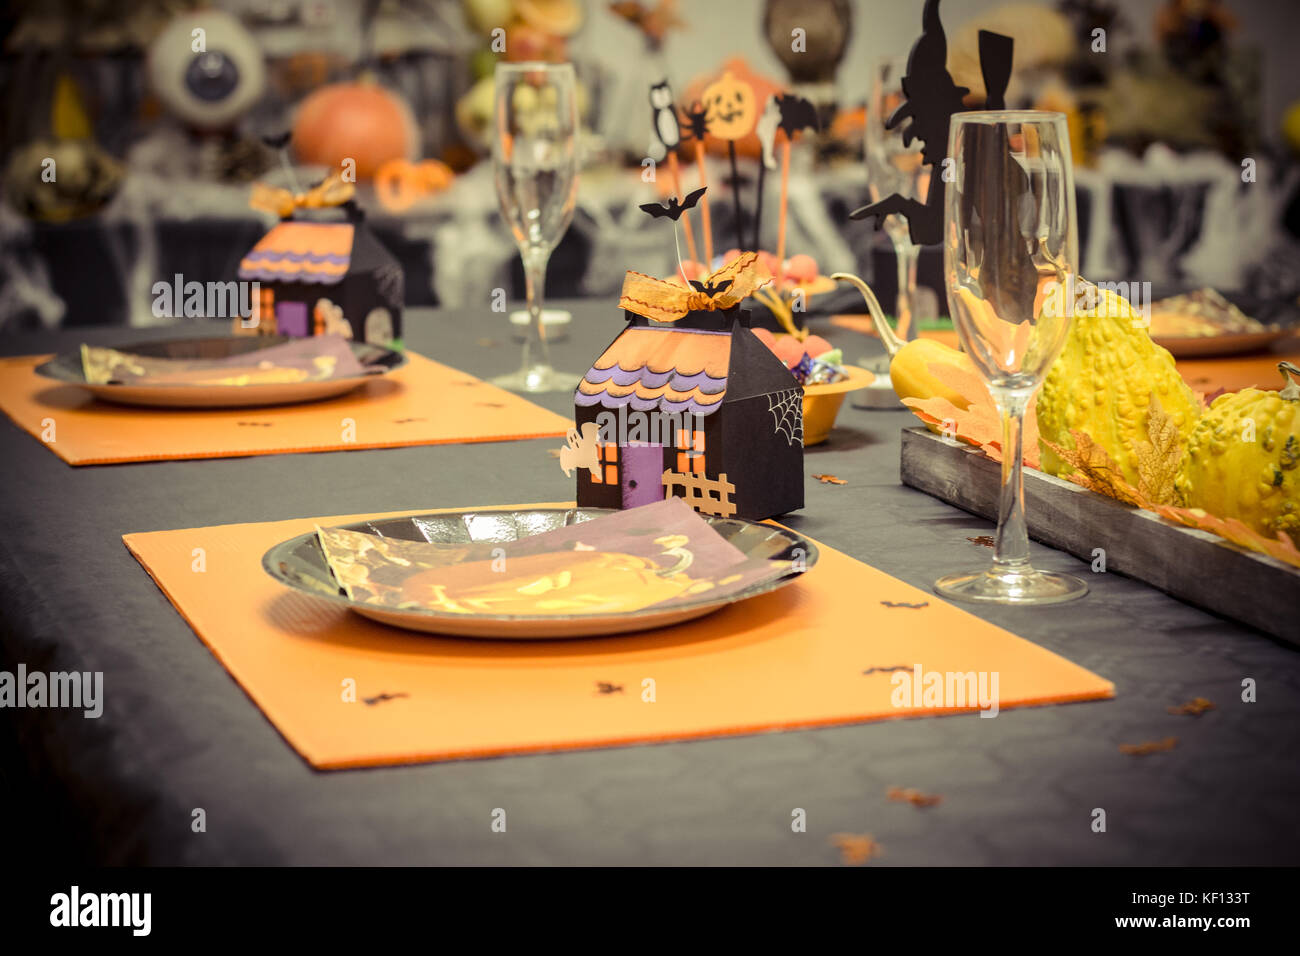 Reception table with a black tablecloth and decorations for halloween party, a small cardboard house, glasses and plates in cartons Stock Photo